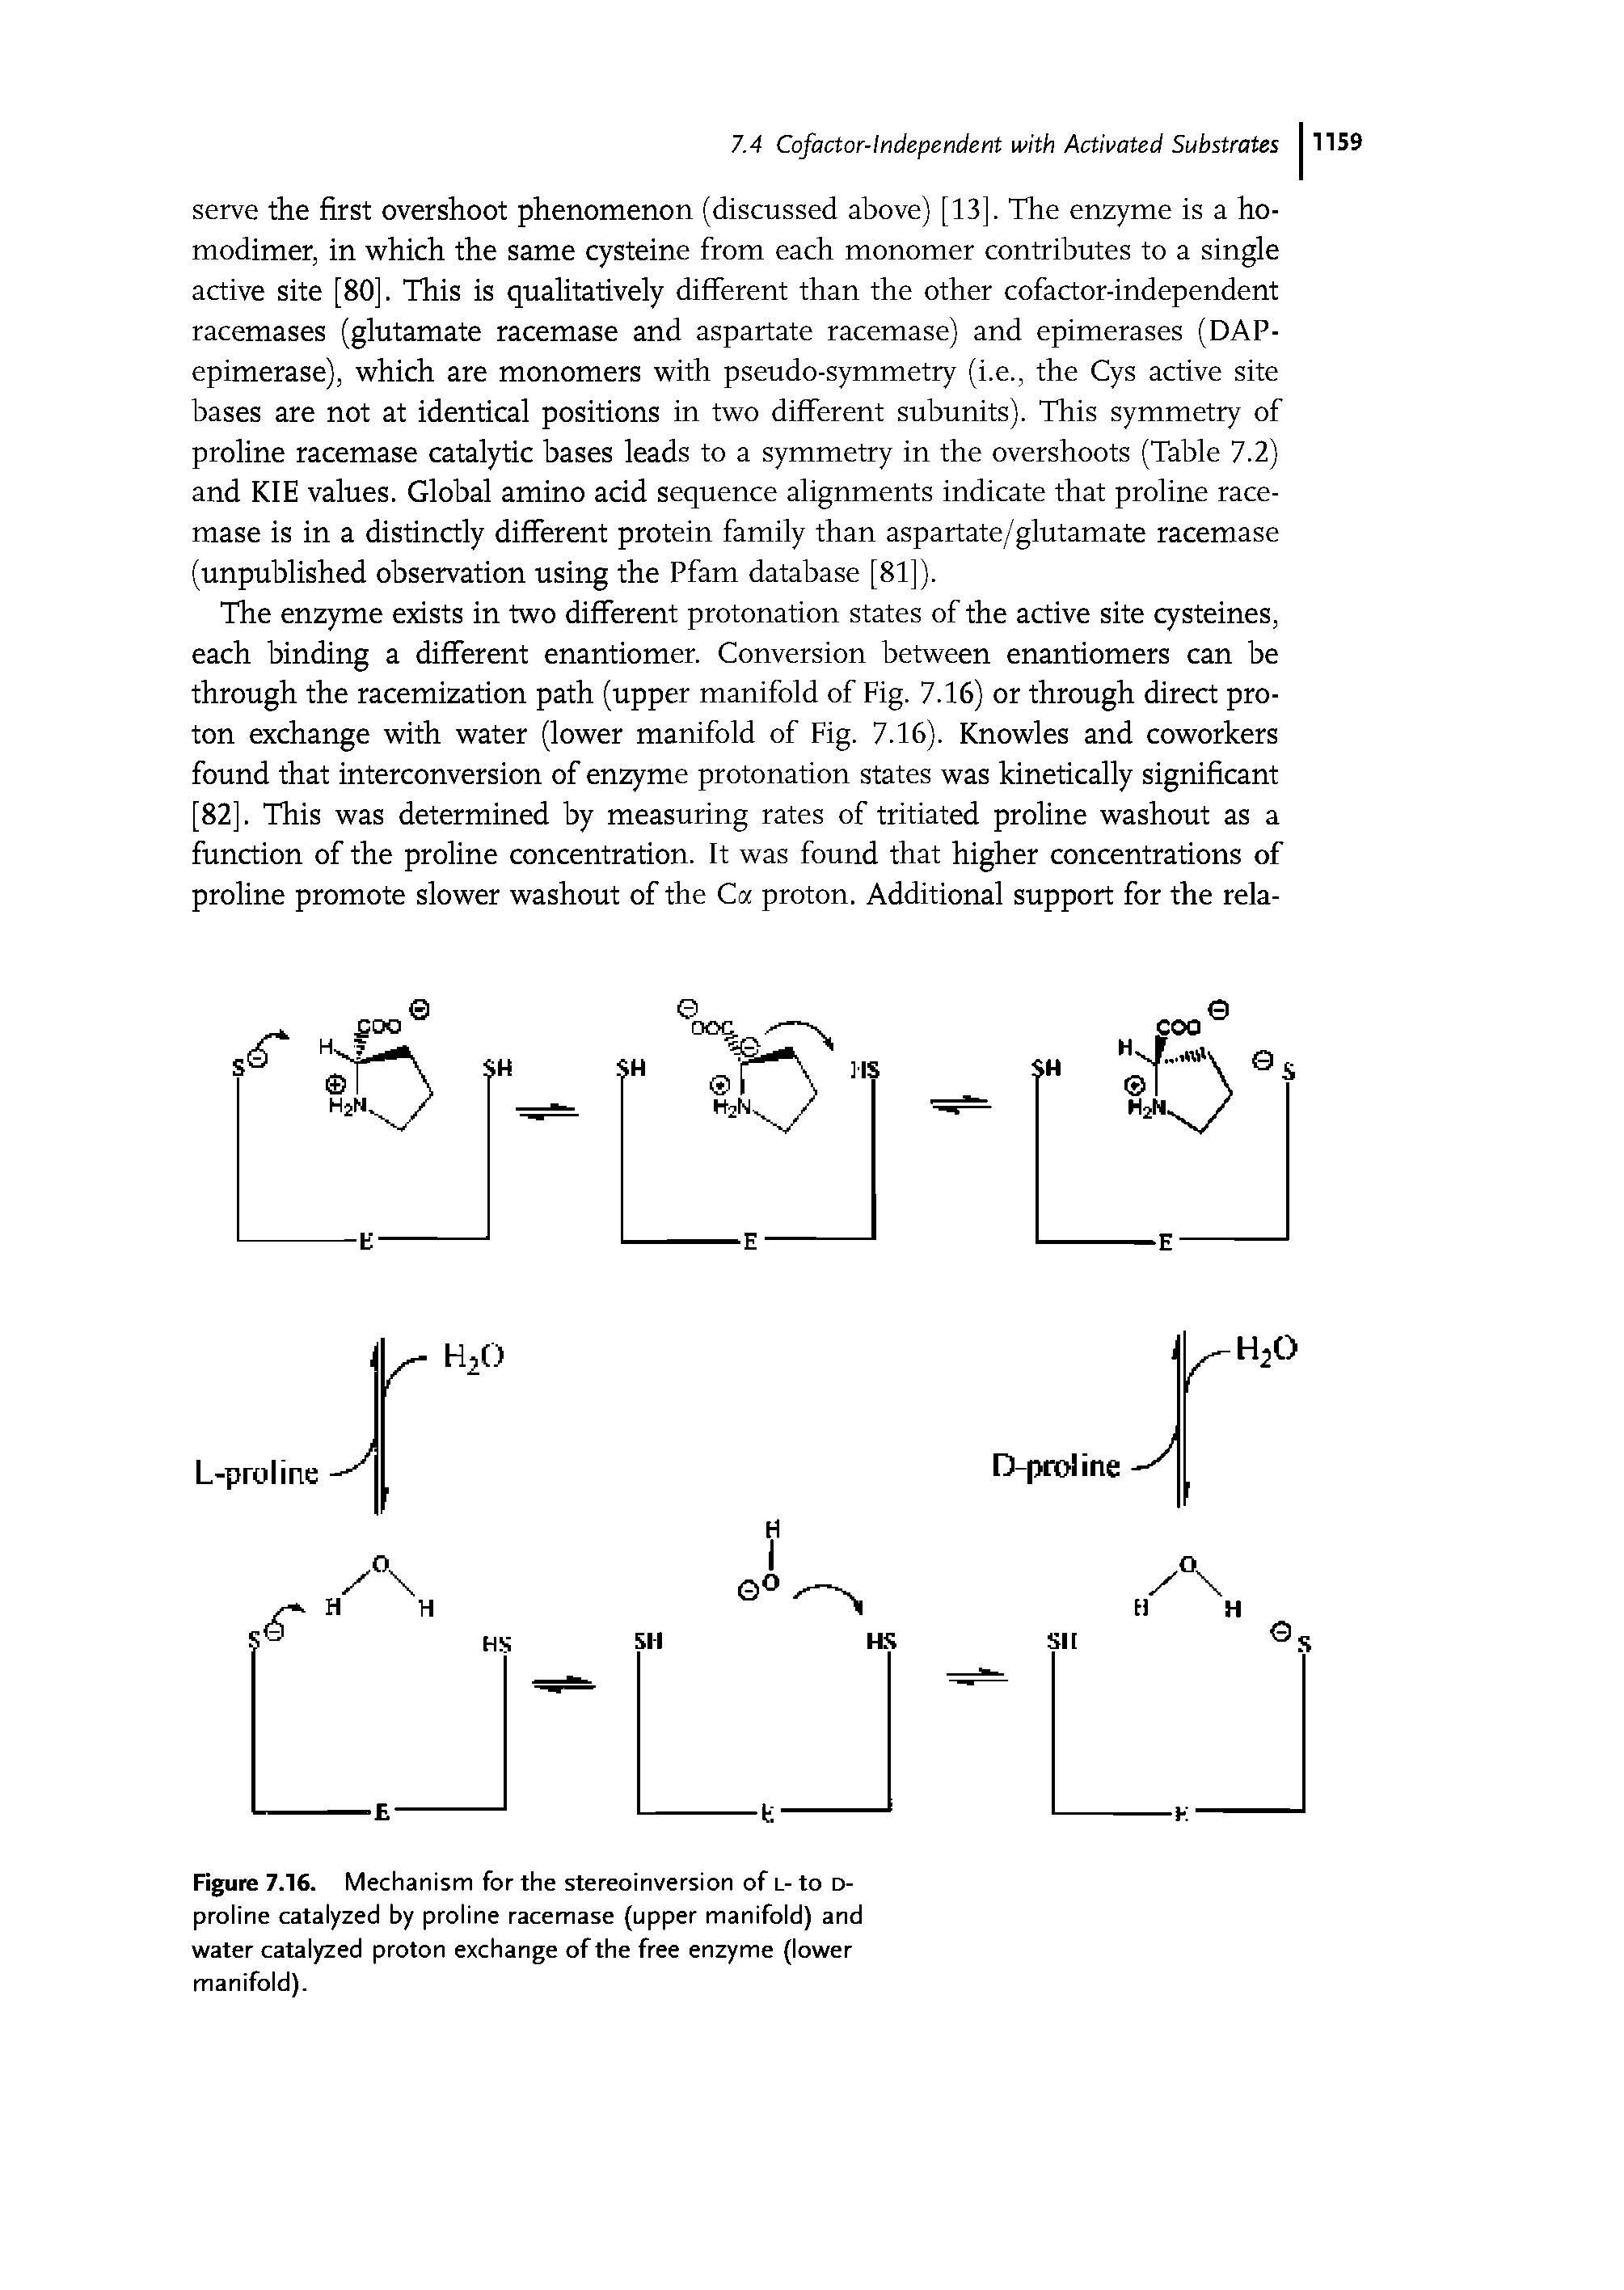 Figure 7.16. Mechanism for the stereoinversion of L- to D-proline catalyzed by proline racemase (upper manifold) and water catalyzed proton exchange of the free enzyme (lower manifold).